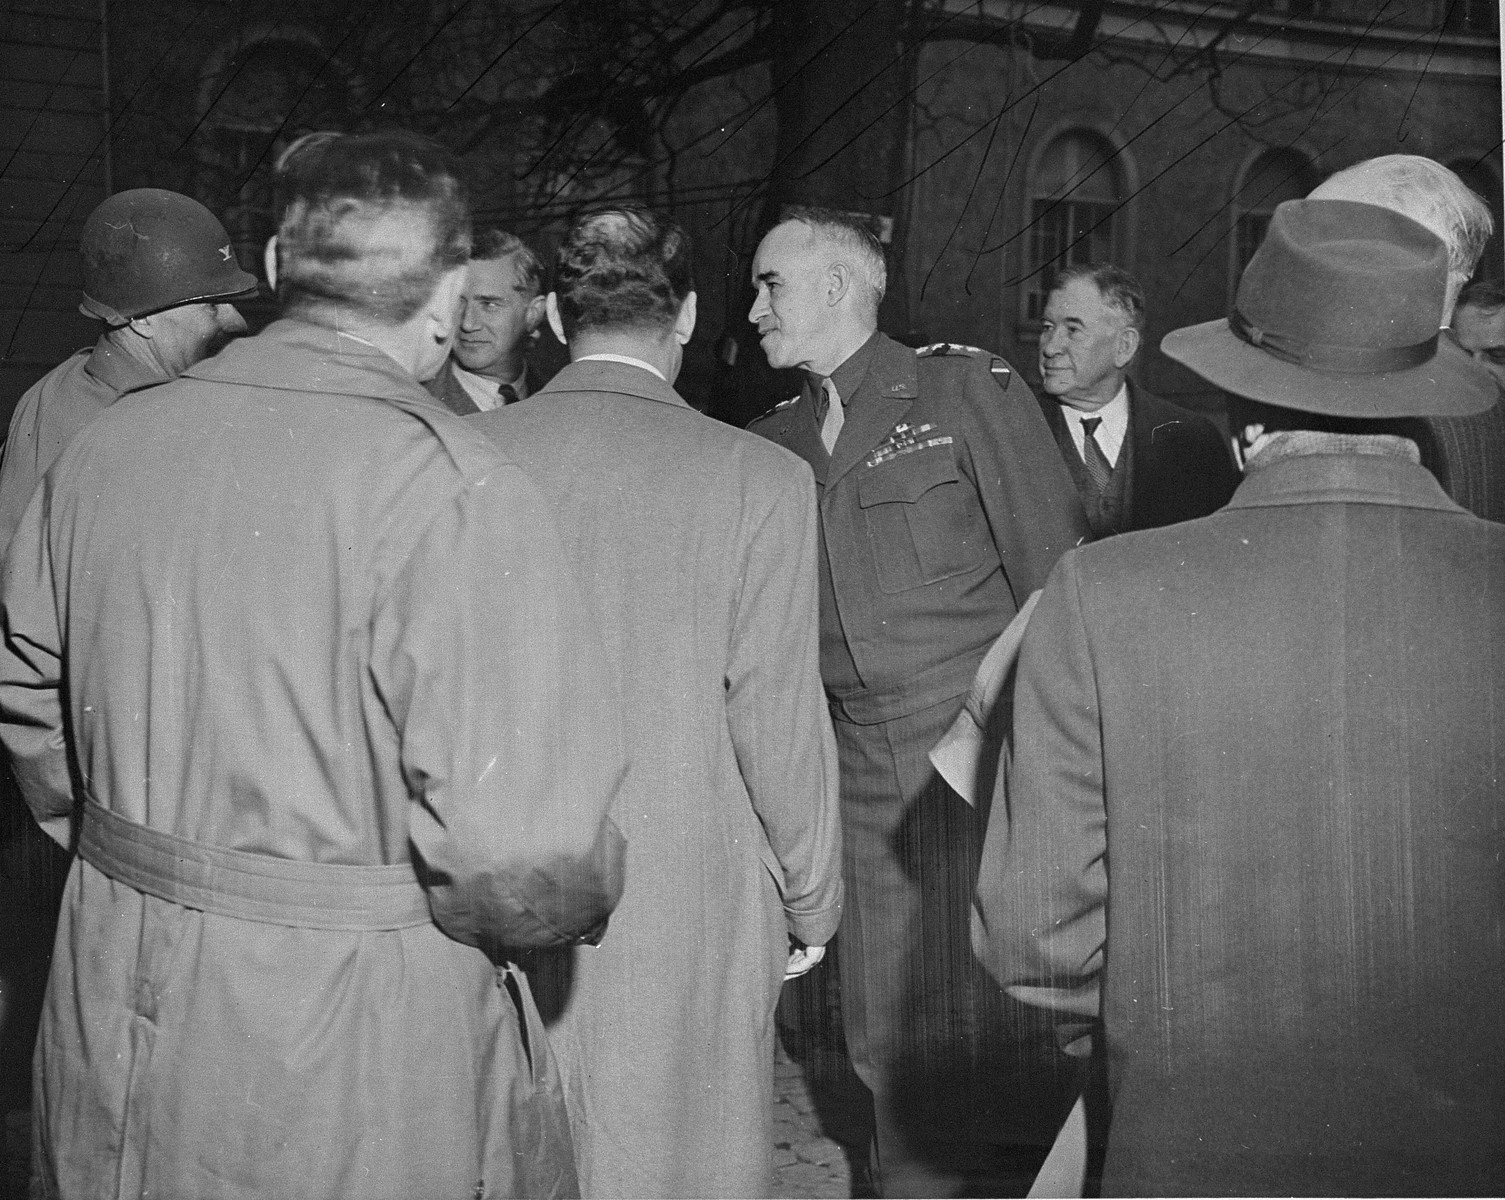 General Omar Bradley greets a group of American congressmen at his headquarters in Wiesbaden.

The congressmen are making a tour of Europe to get first hand information on German atrocities.